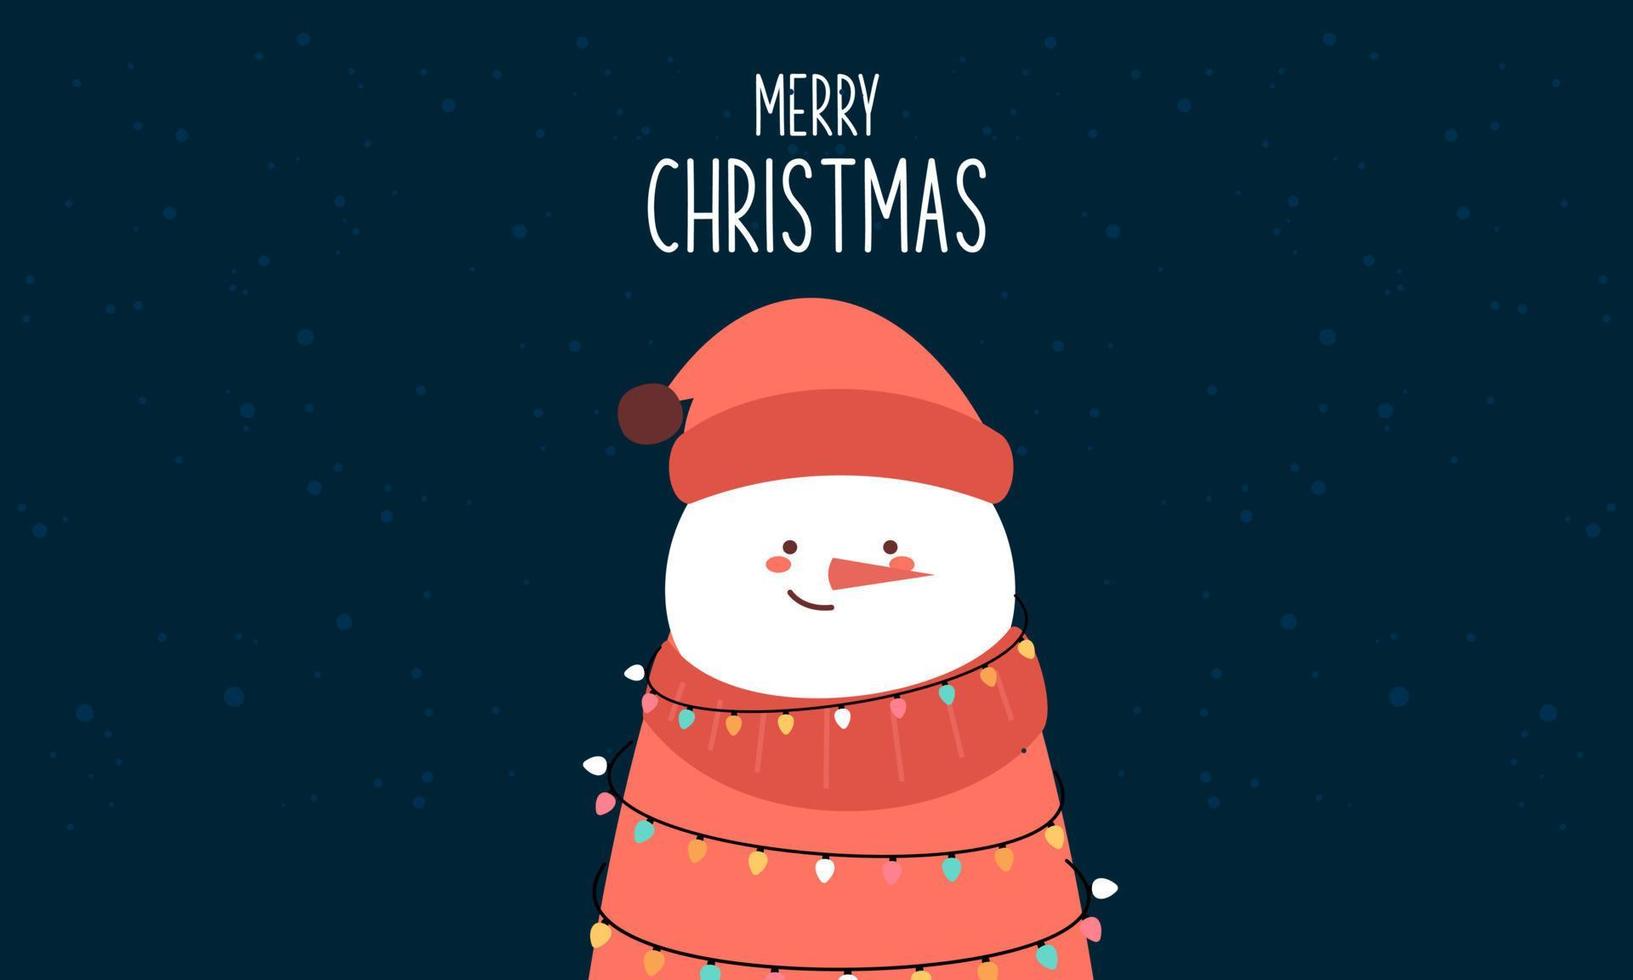 Merry Christmas with Happy Snowman Background vector